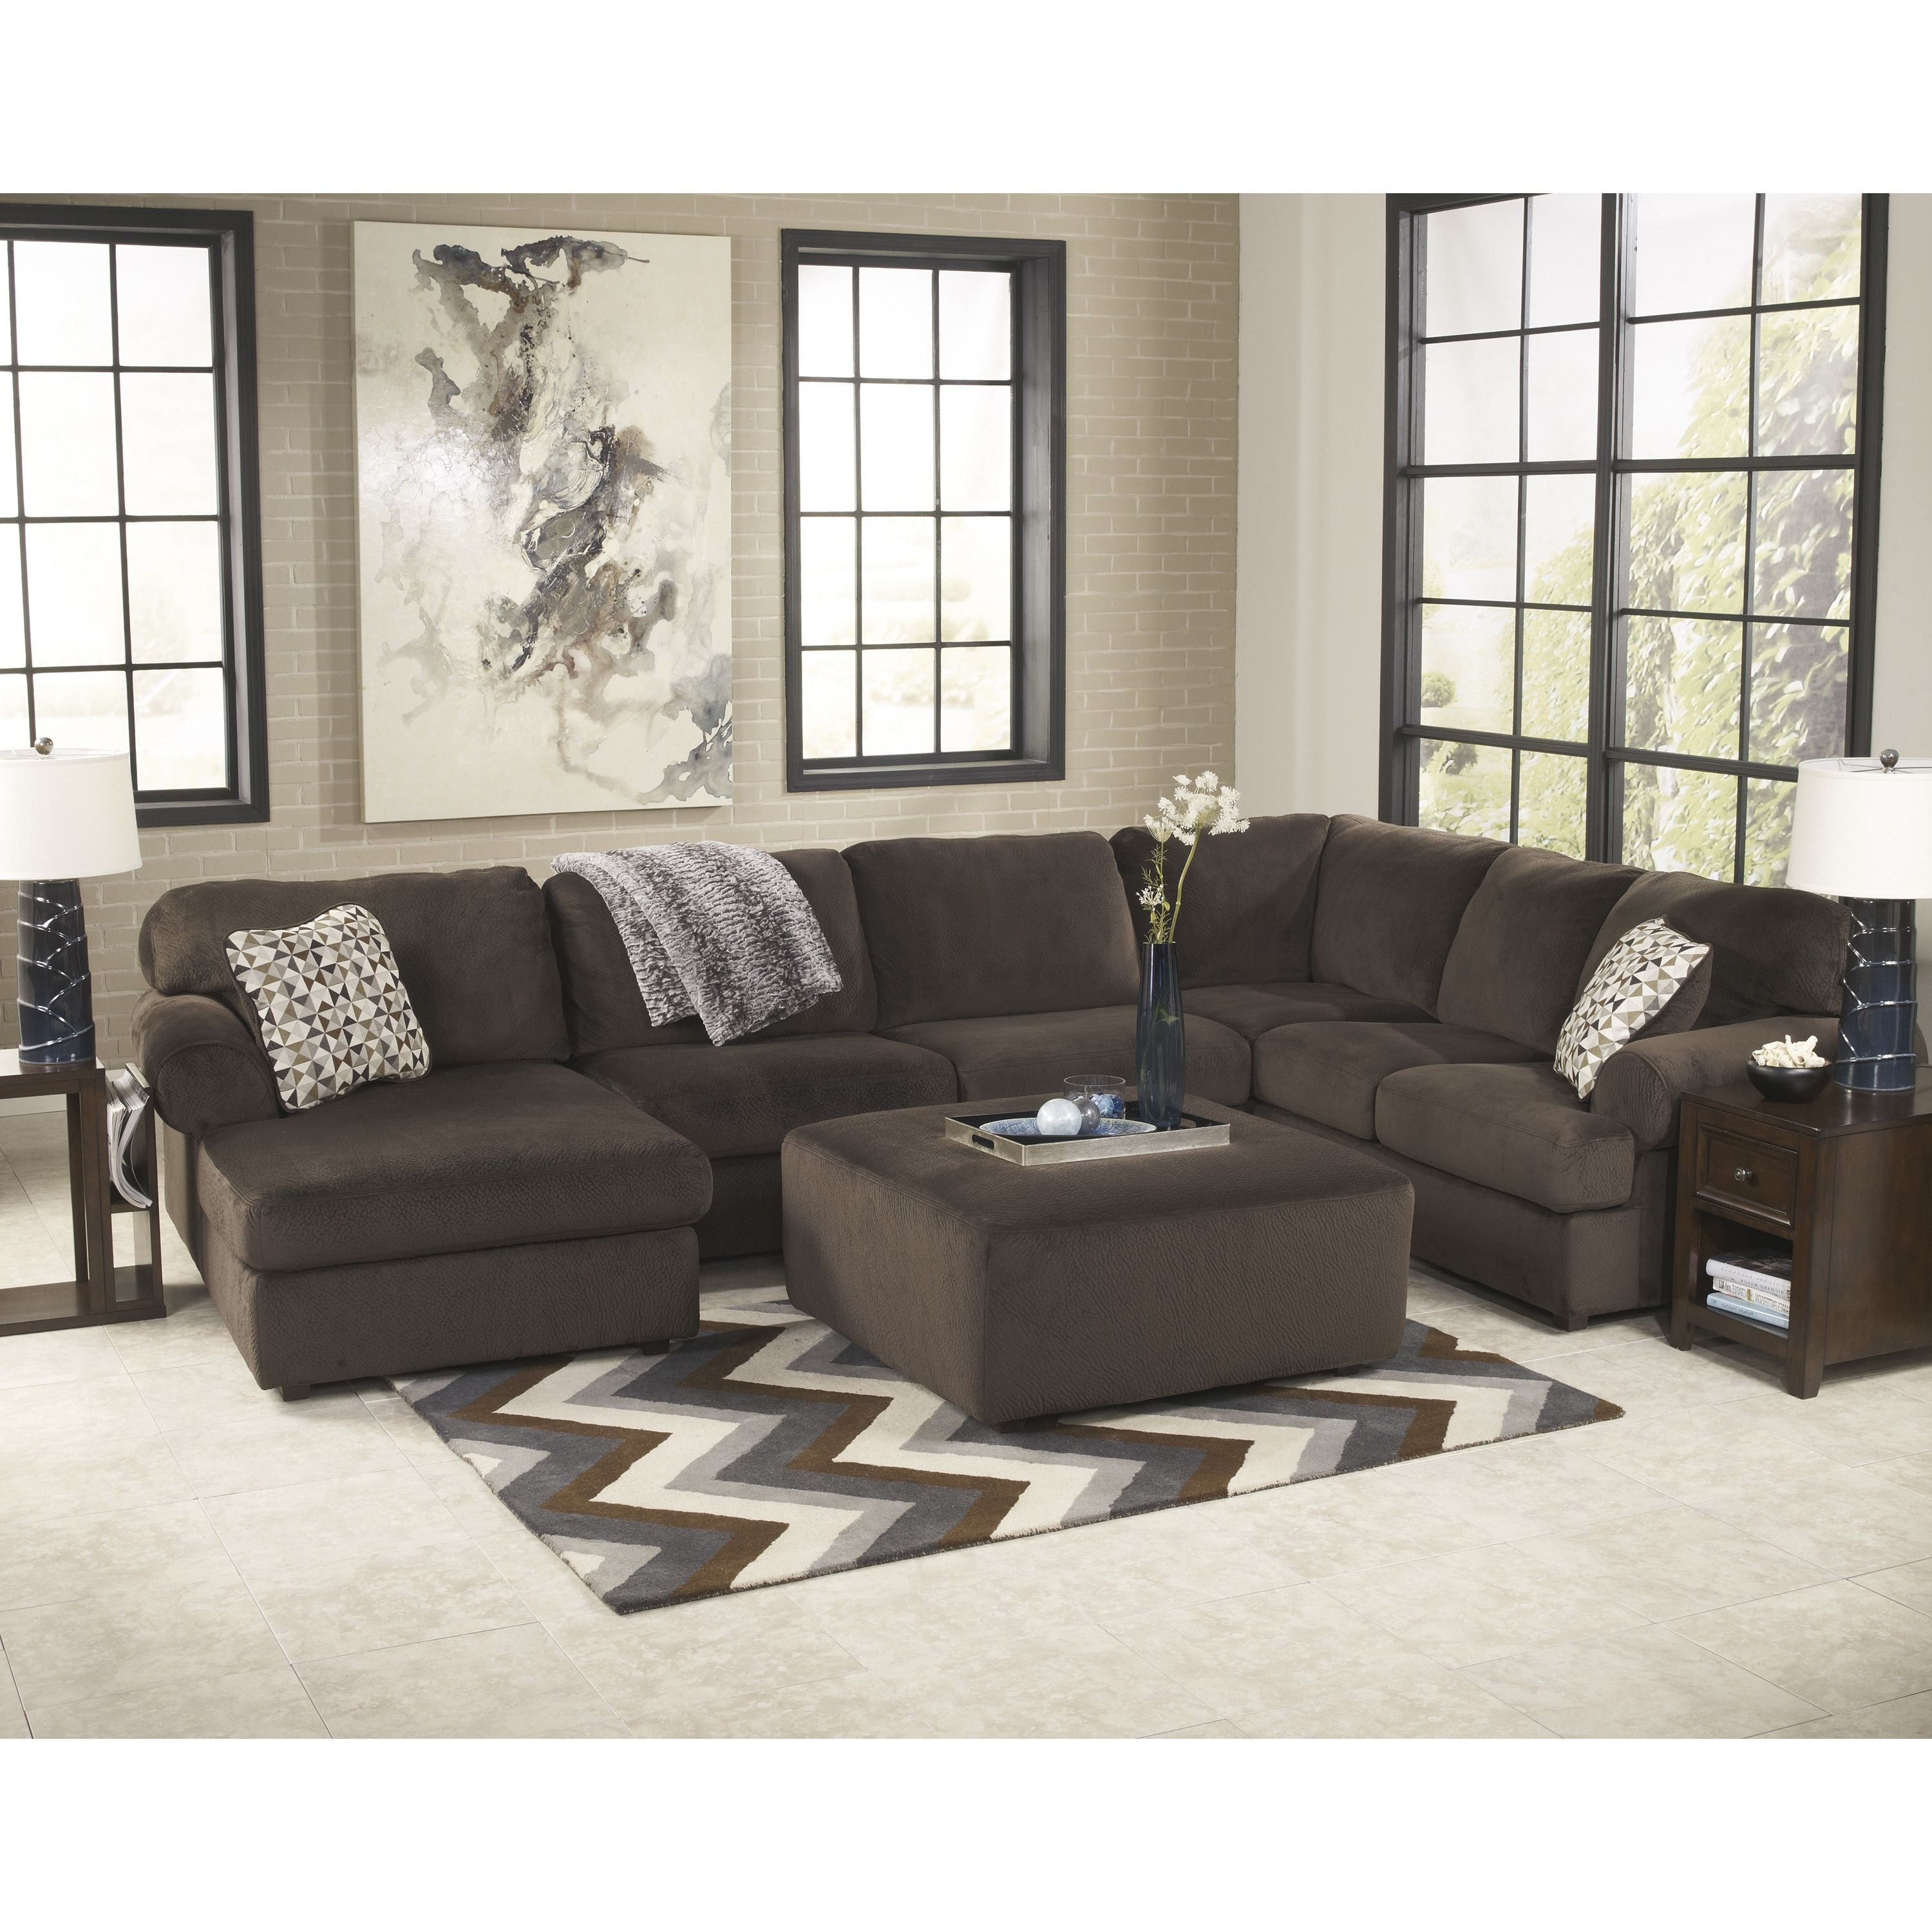 Free Wayfair Sectionals Furniture Using Pretty Cheap Sectional Sofas Throughout Cheap Sectionals With Ottoman (View 13 of 15)